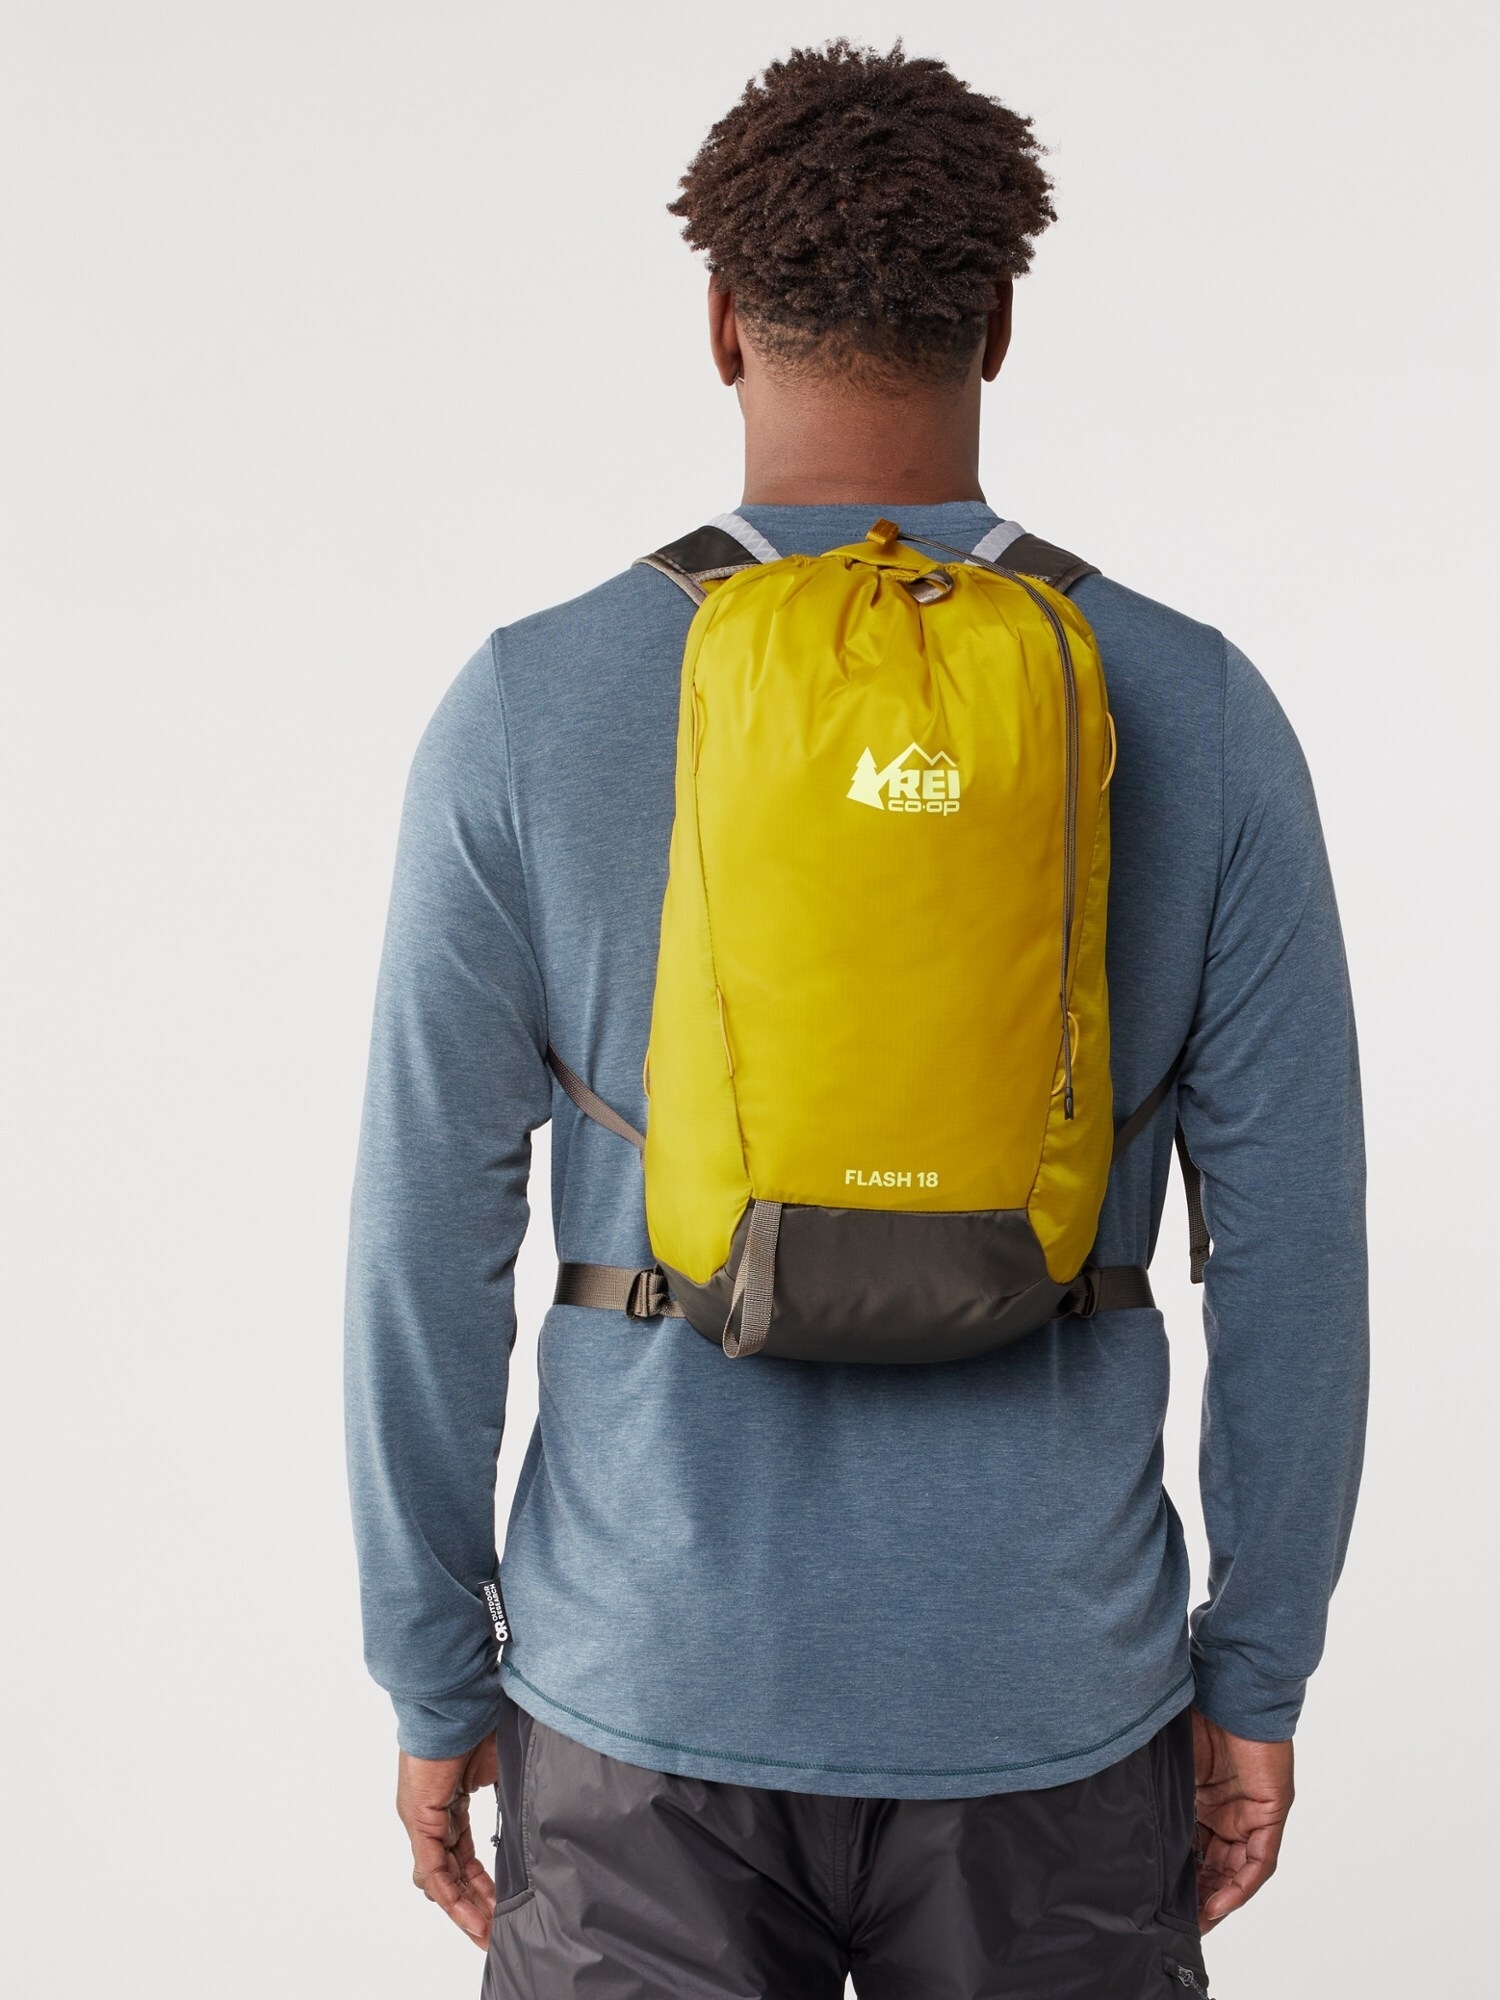 Person with a yellow backpack standing with their back to the camera